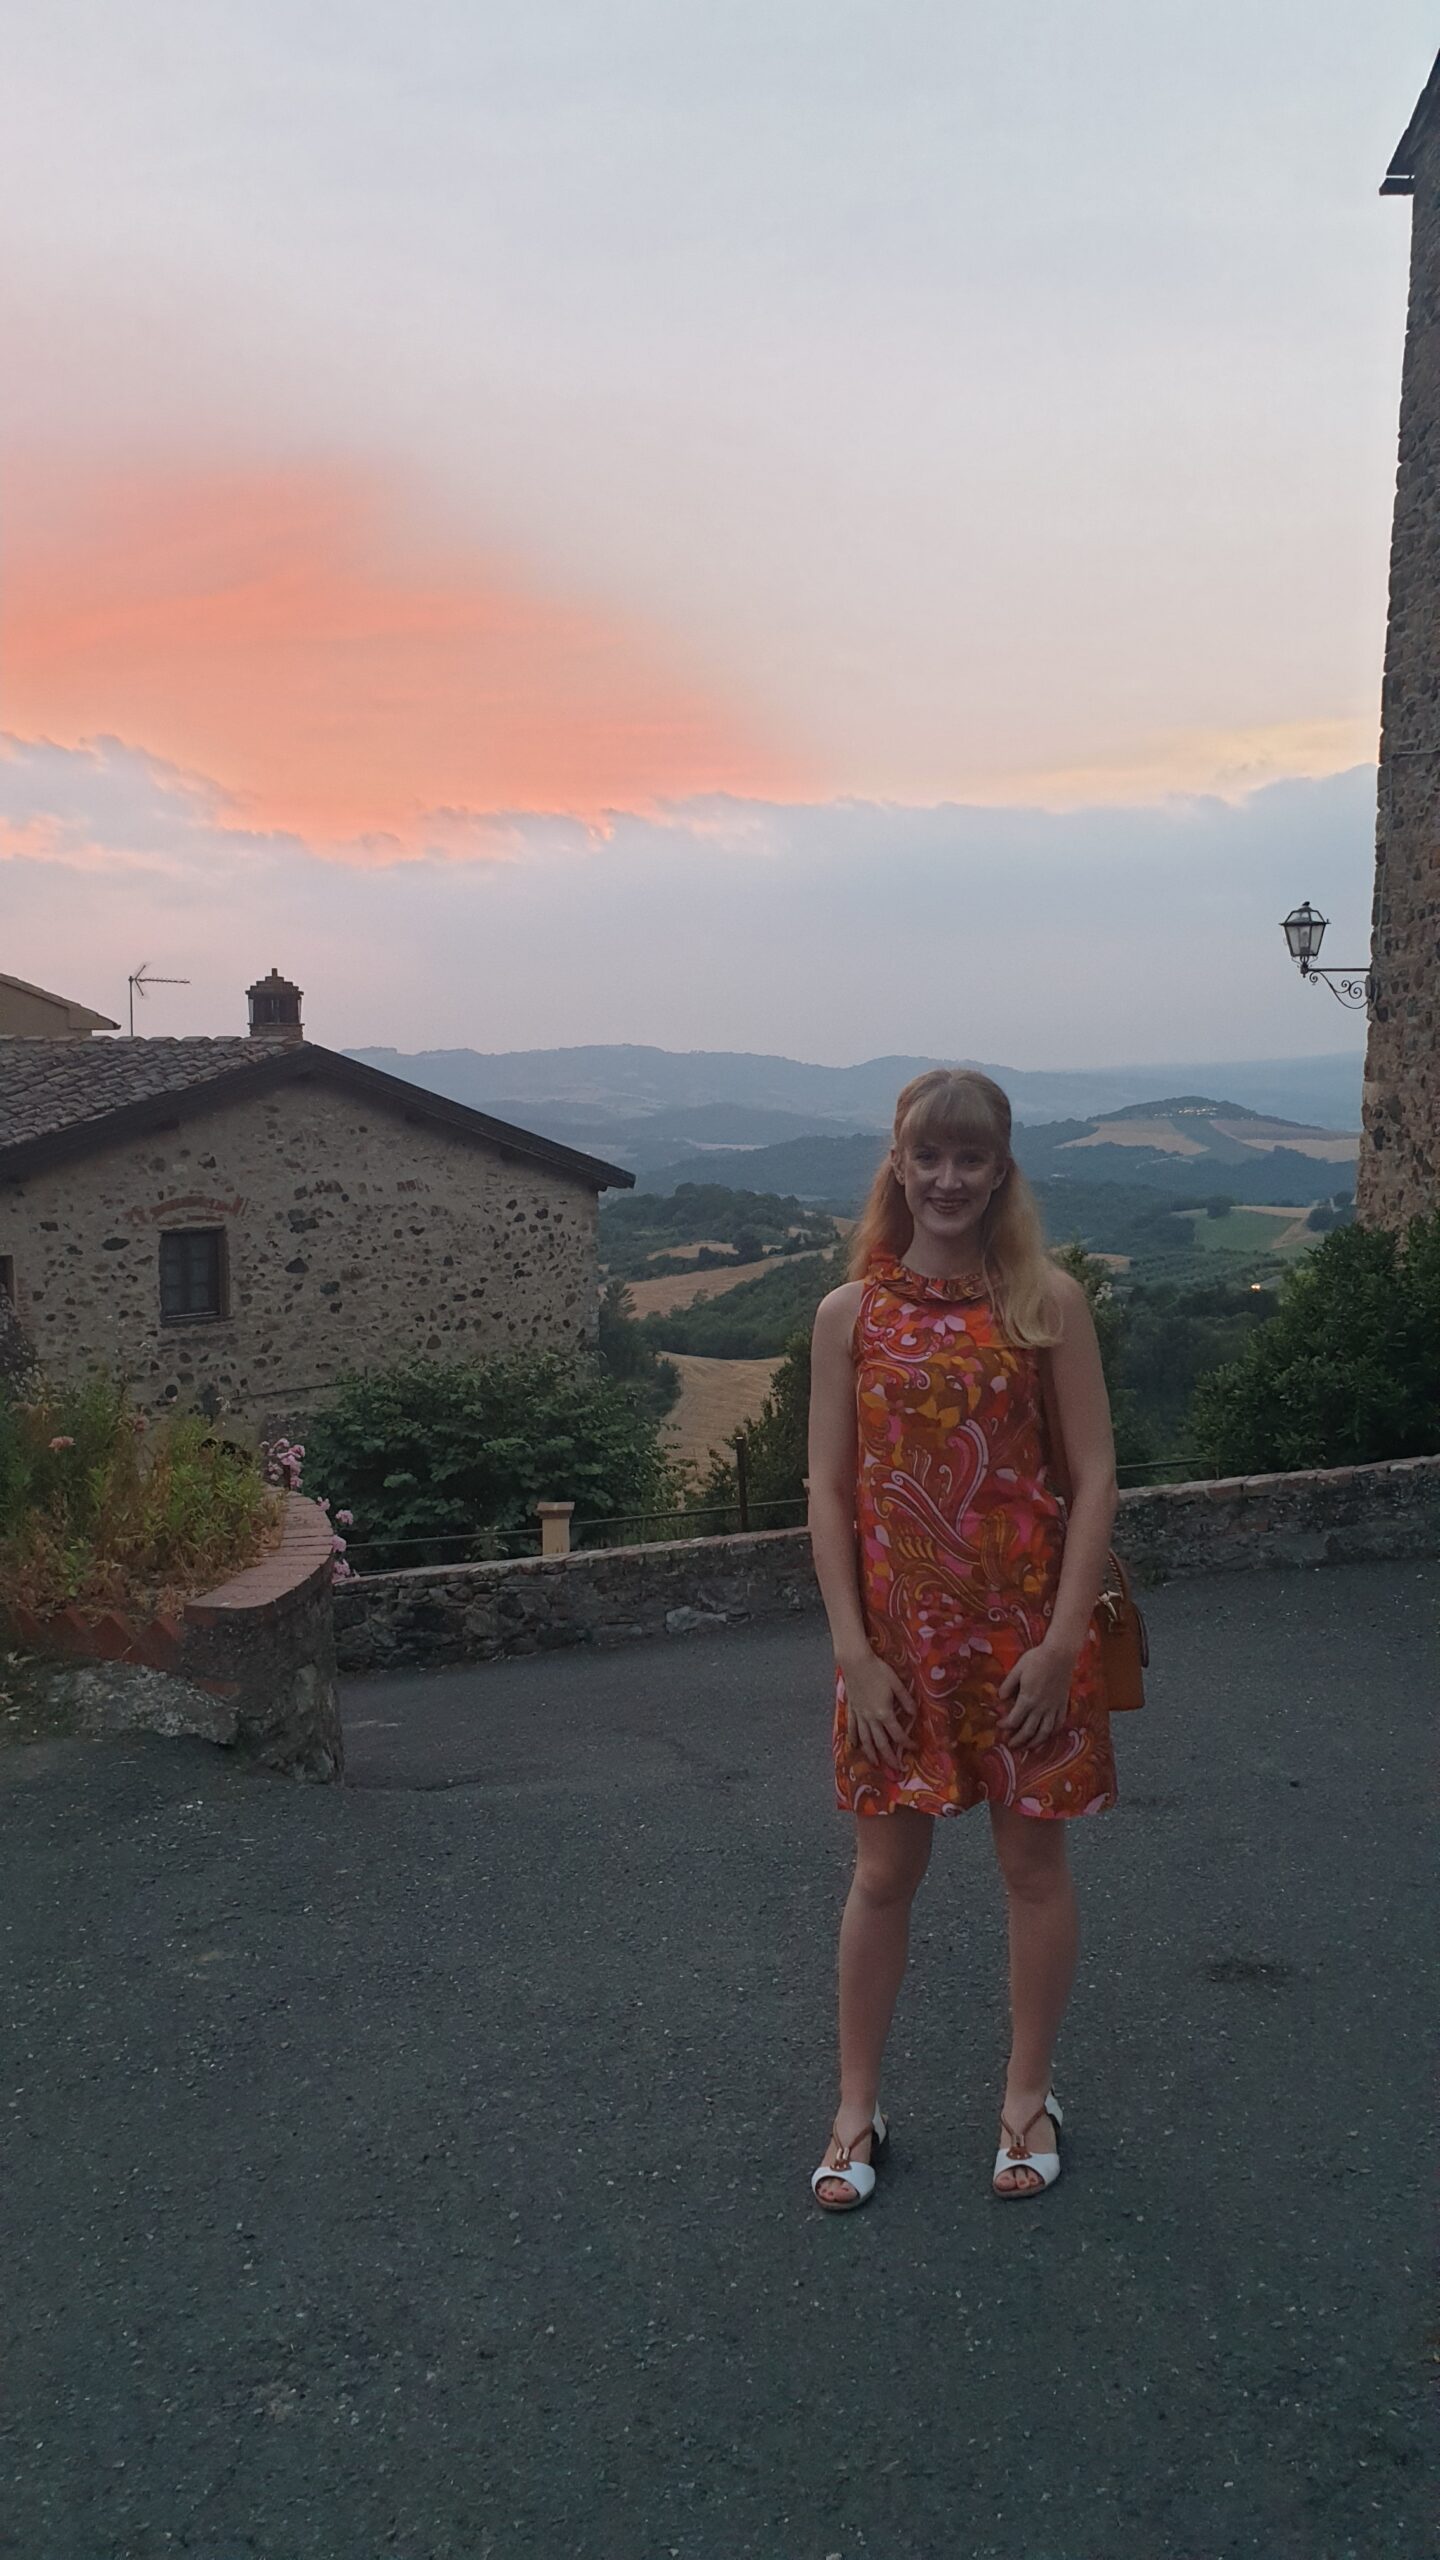 wwoofing in tuscany